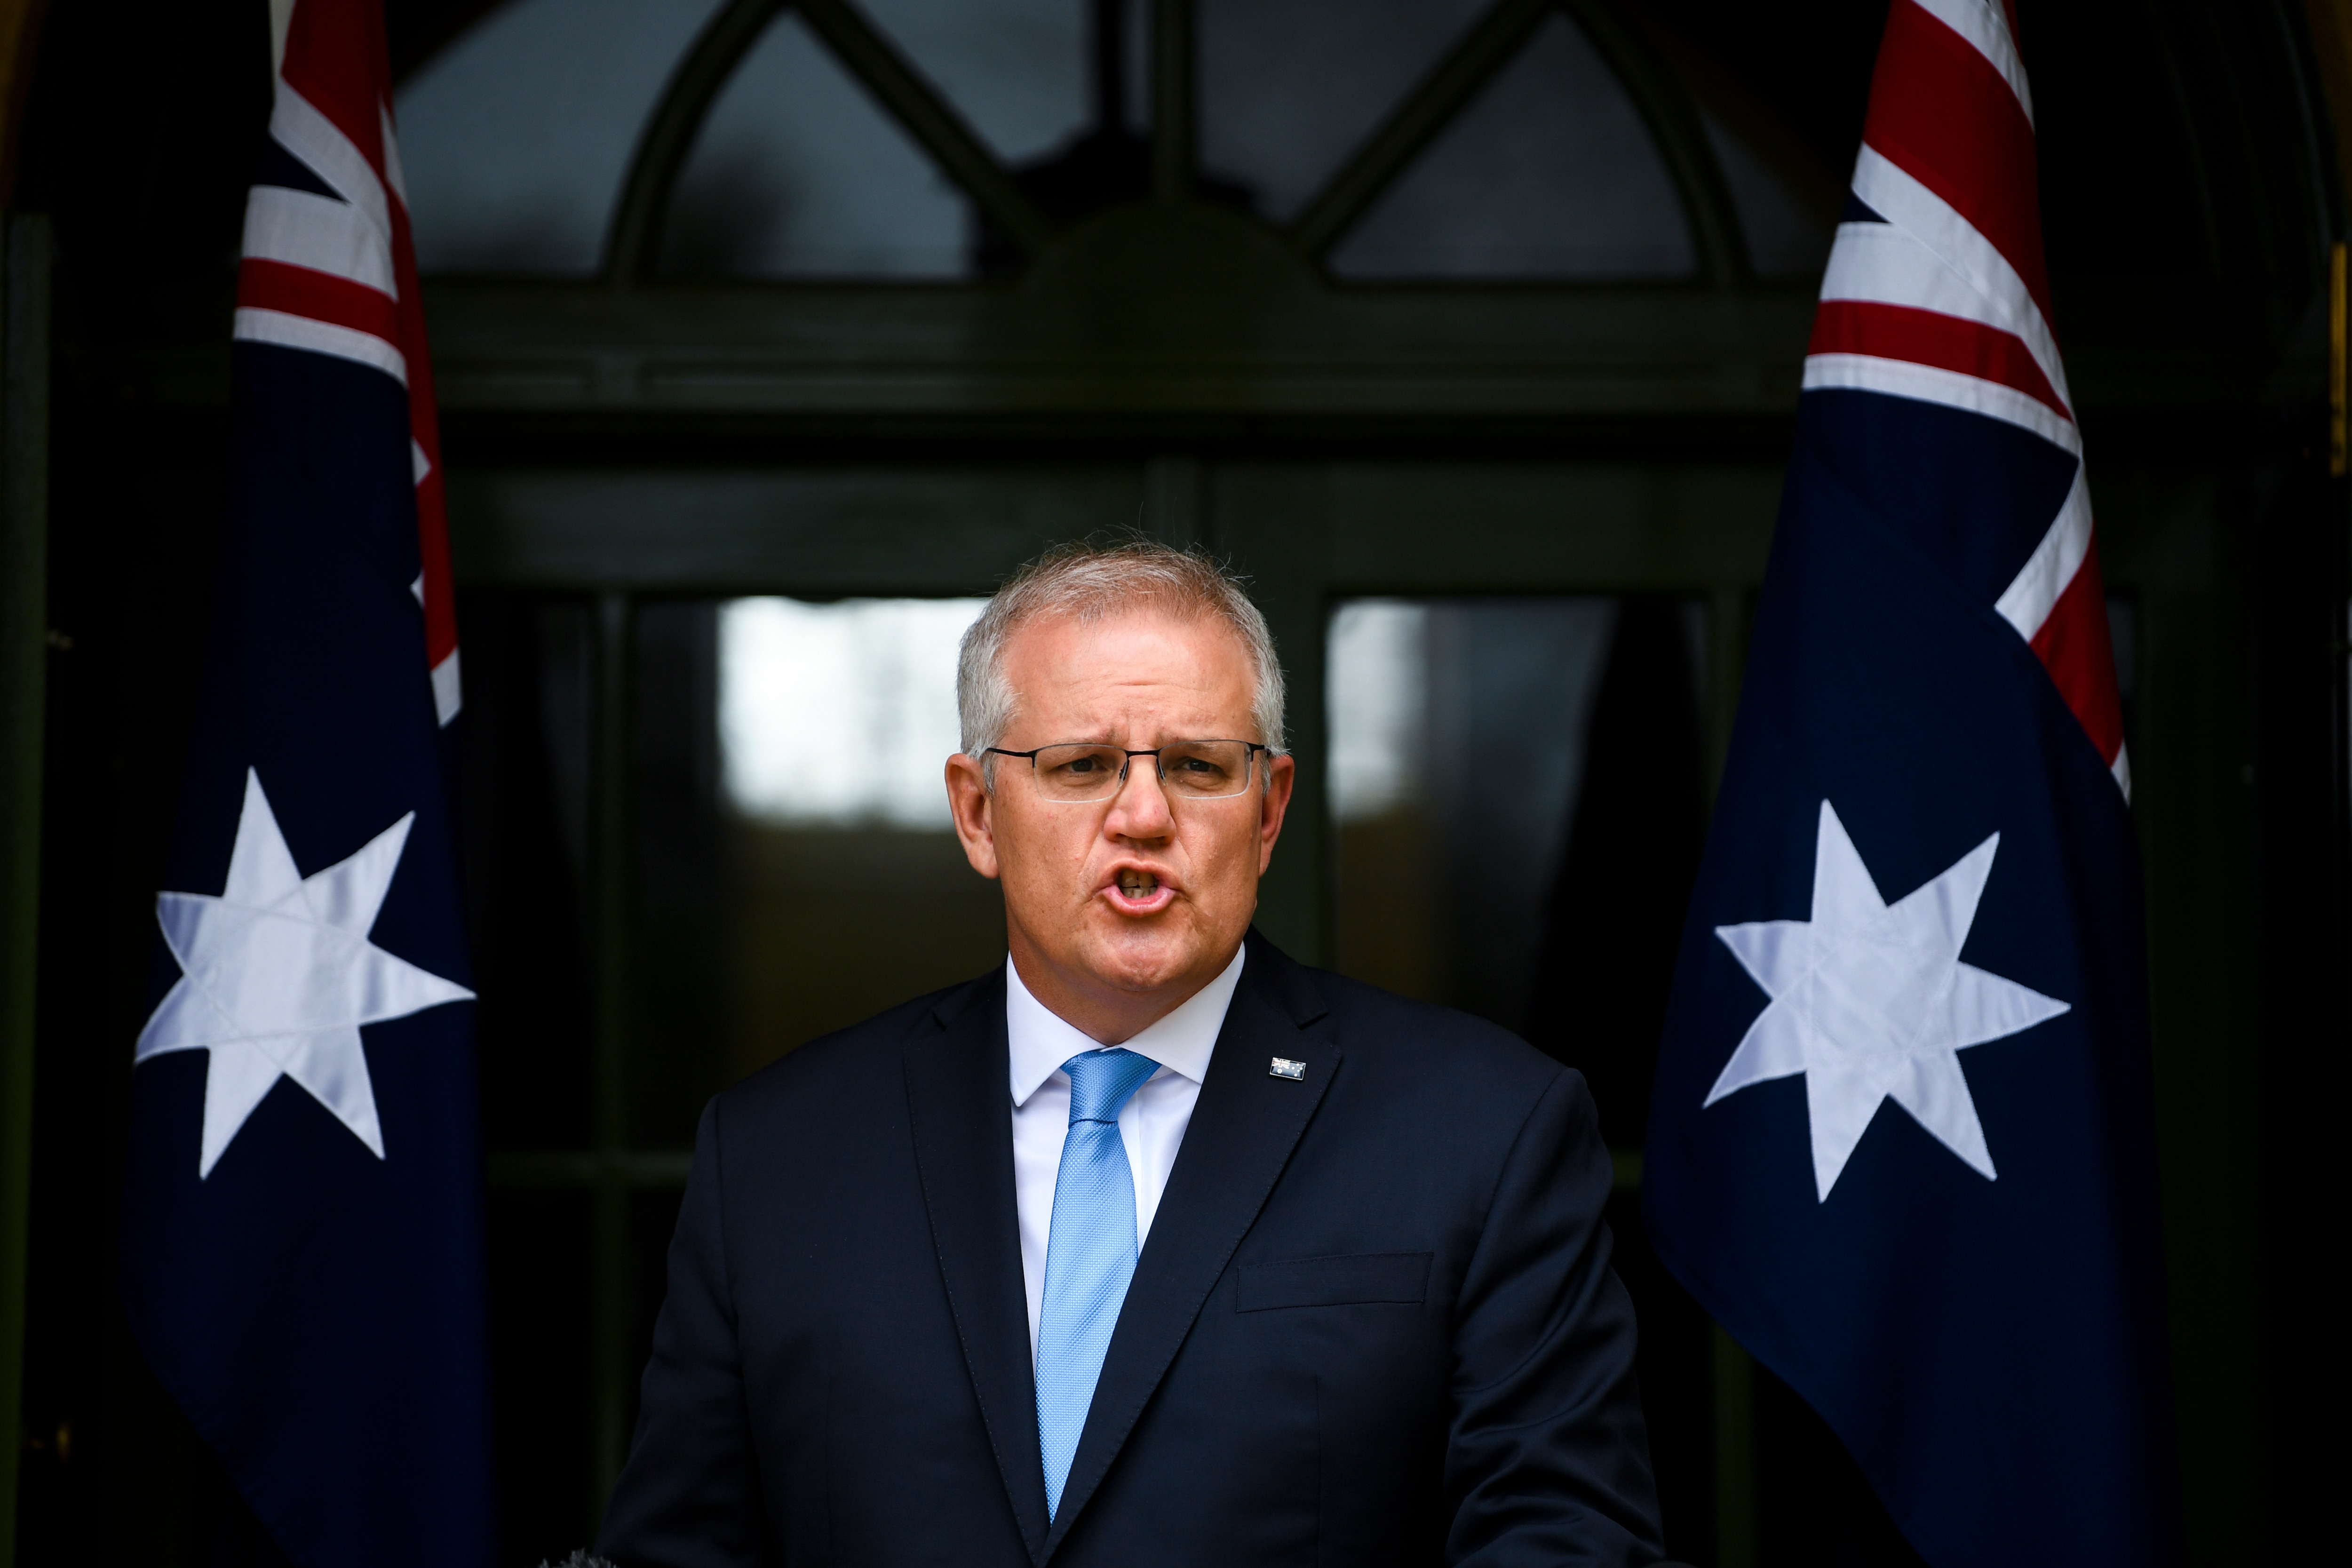 Prime Minister Scott Morrison speaks to the media during a press conference at the Lodge in Canberra, Friday, October 1, 2021.